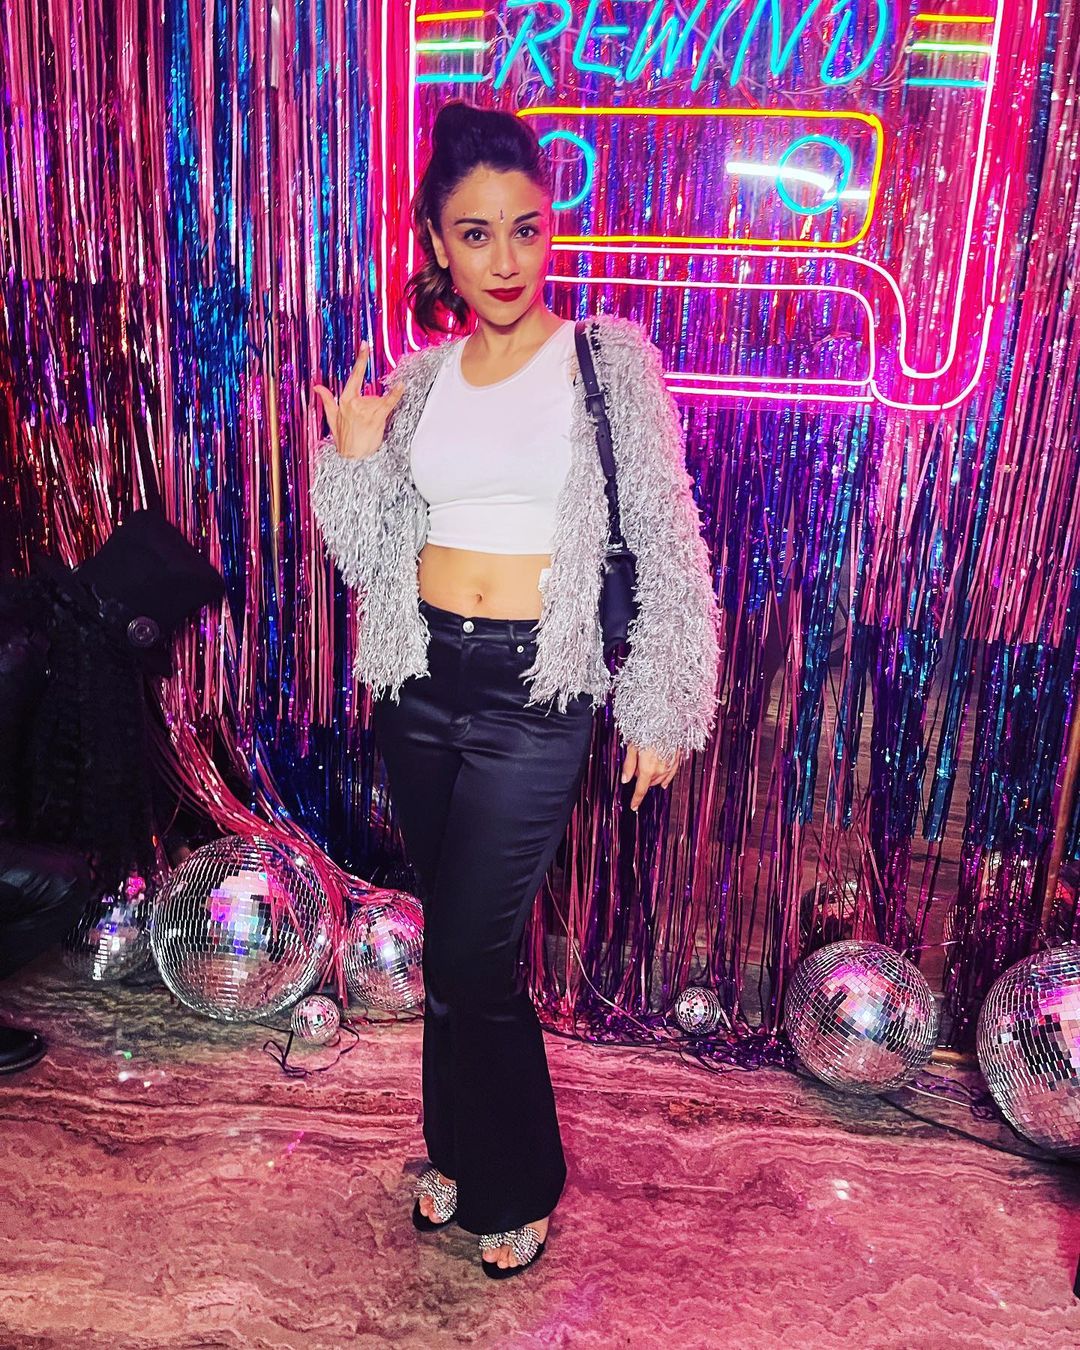 Amrita Puri Dazzling Look In Glittery Faux Fur Sliver Jacket With Casuals Amrita Puri Dazzling Looks And Outfit